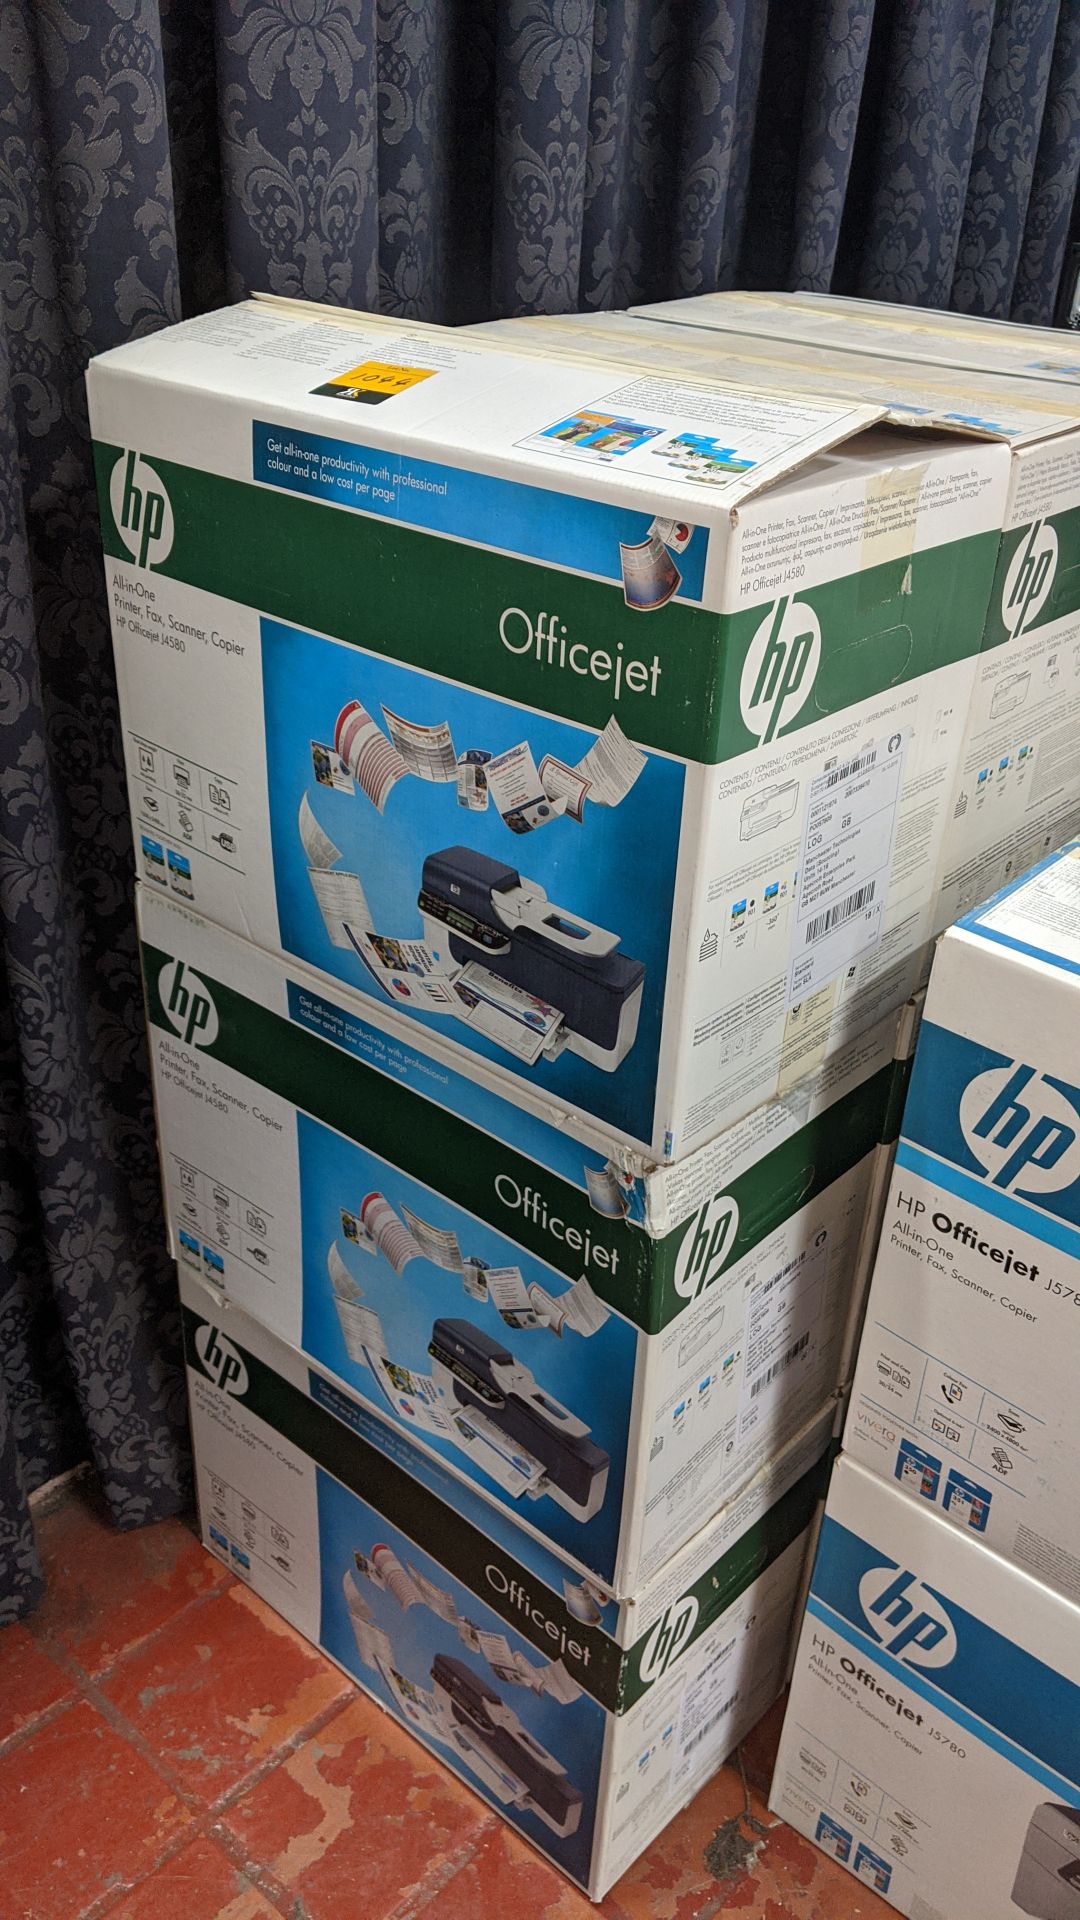 9 off HP OfficeJet J4580 all in one printer fax scanner copiers. This is one of a large number of - Image 2 of 3